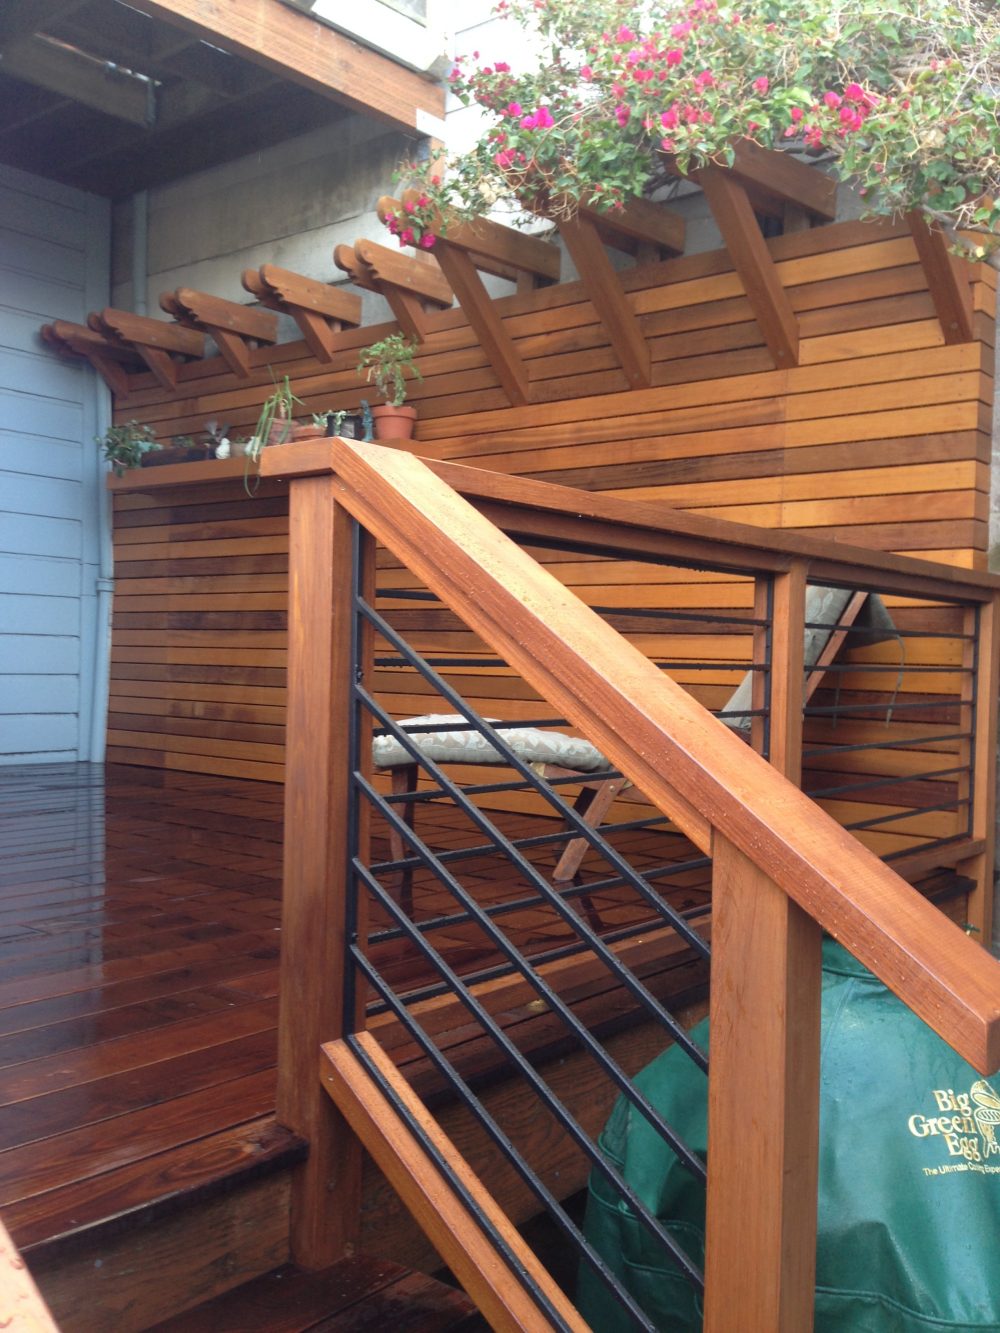 Wood patio with steps with cable railing; flower awning atop the fence